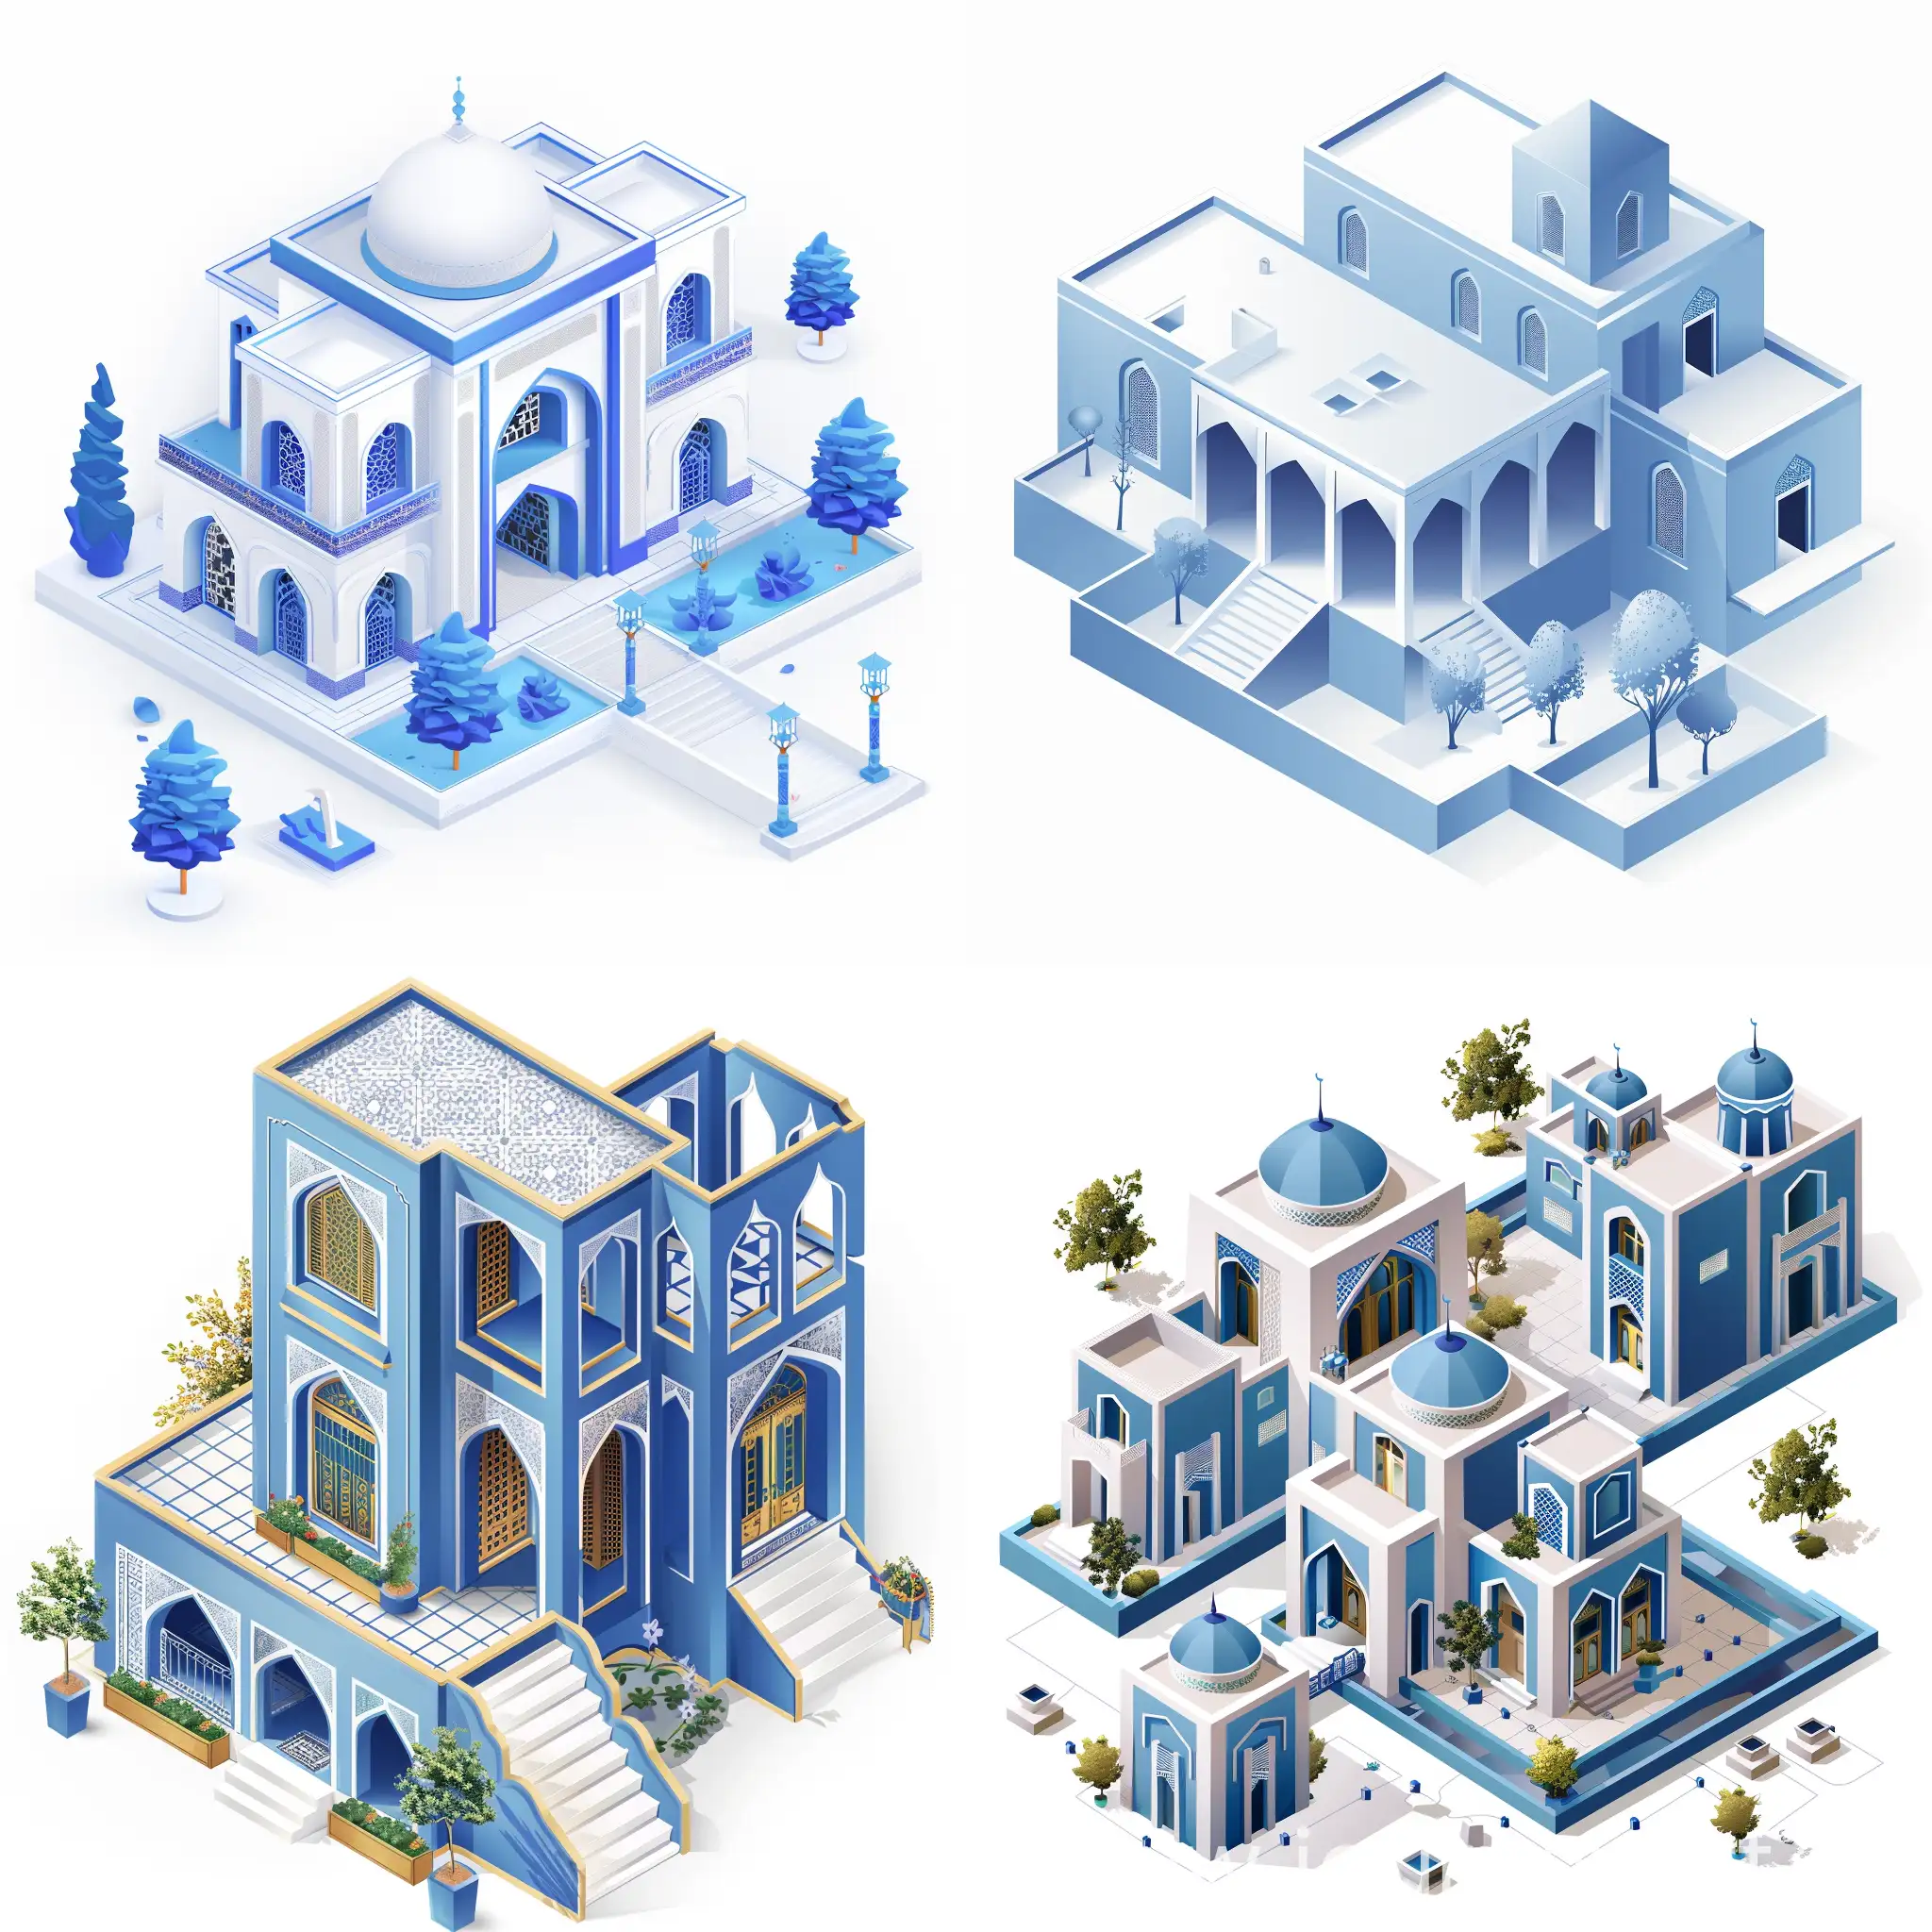 Meeting the future of residential architecture with regard to historical architecture ، Persian architecture ، 2d illustration ، isometric ، poster design ، Persian bleu  ، graphic rendering ، white background